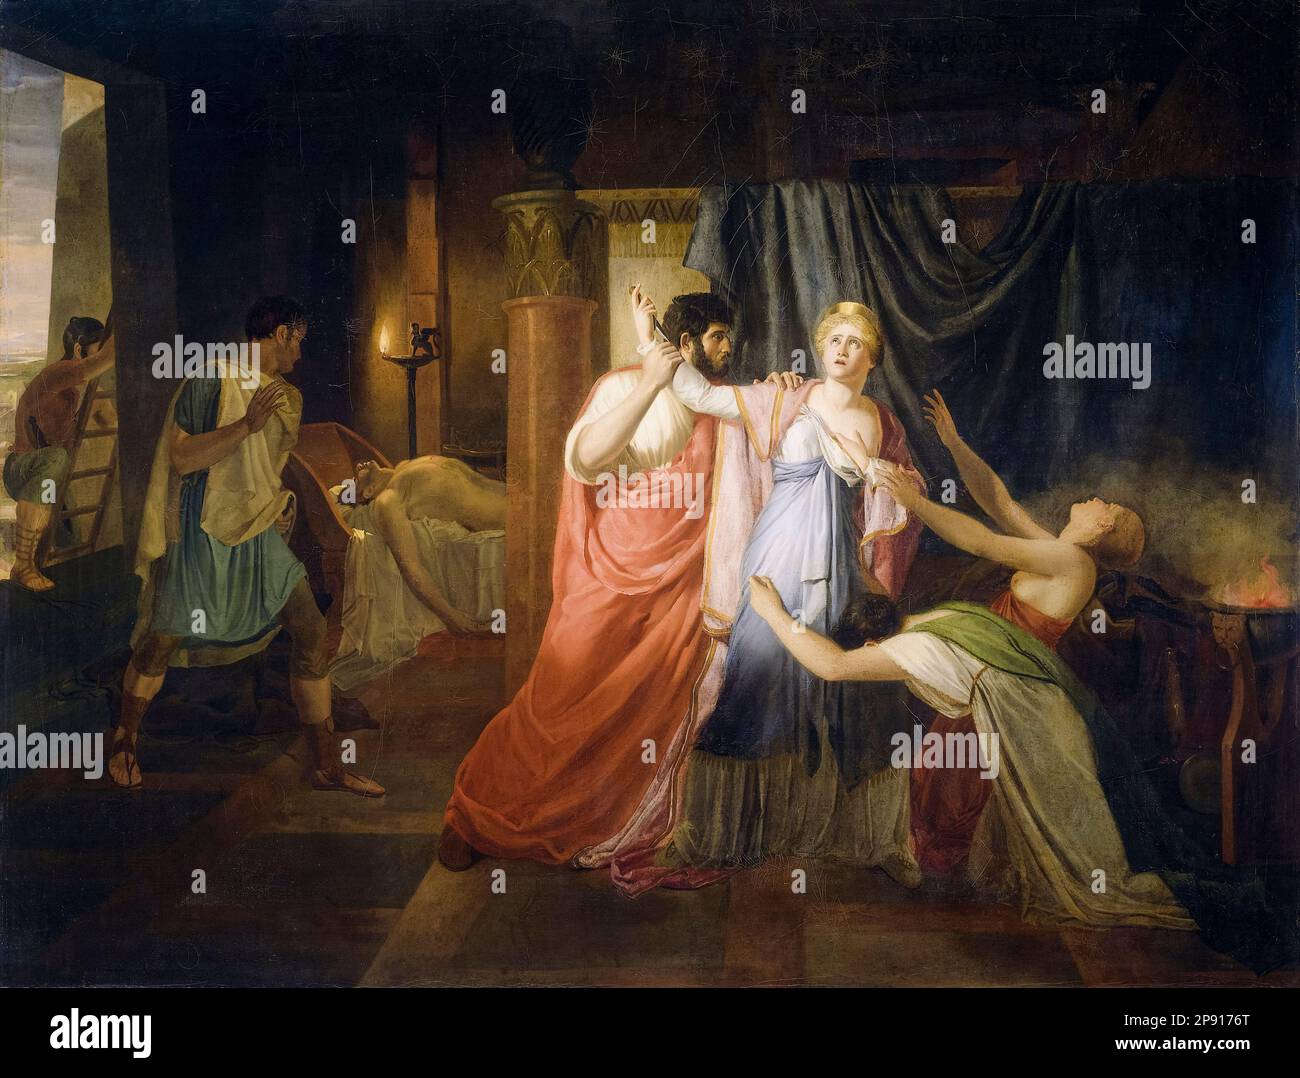 Proculeius preventing Cleopatra from stabbing herself, painting in oil on canvas by Joannes Echarius Carolus Alberti, 1810 Stock Photo